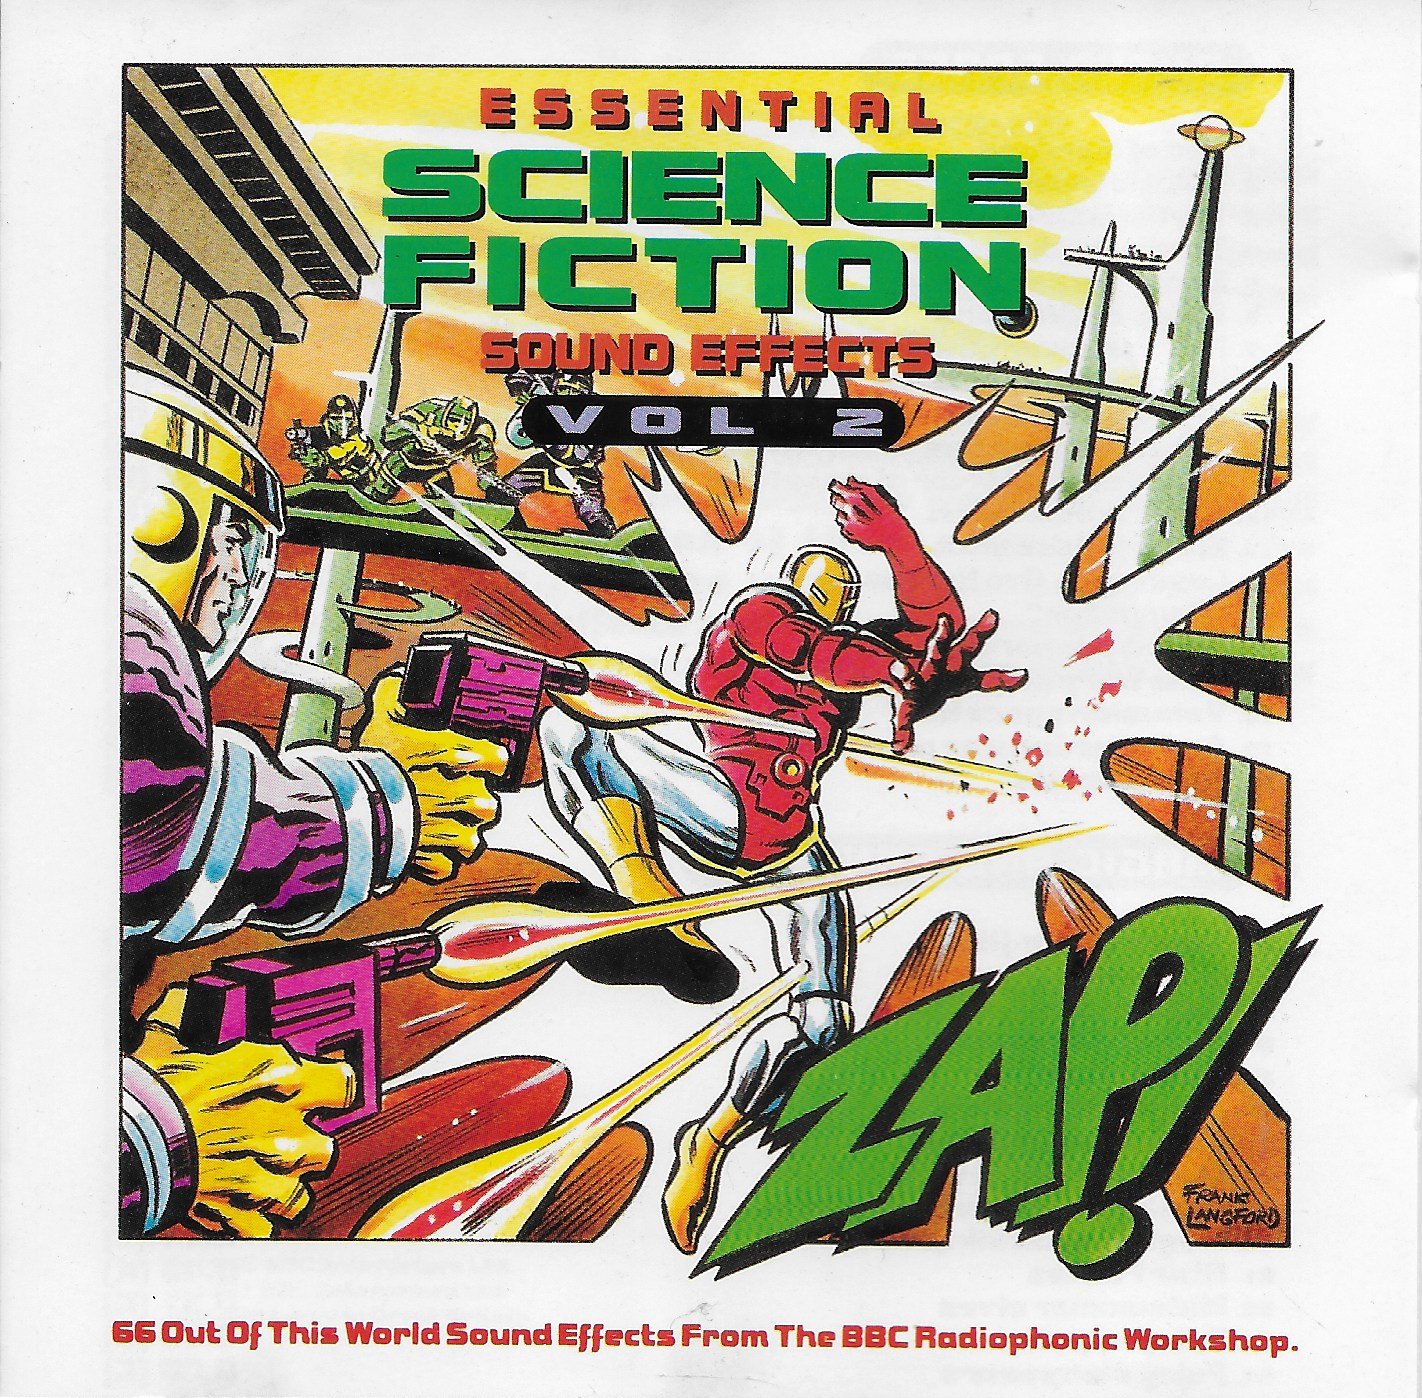 Picture of BBCCD855 Essential science-fiction sound effects - Volume 2 by artist The BBC Radiophonic Workshop from the BBC cds - Records and Tapes library